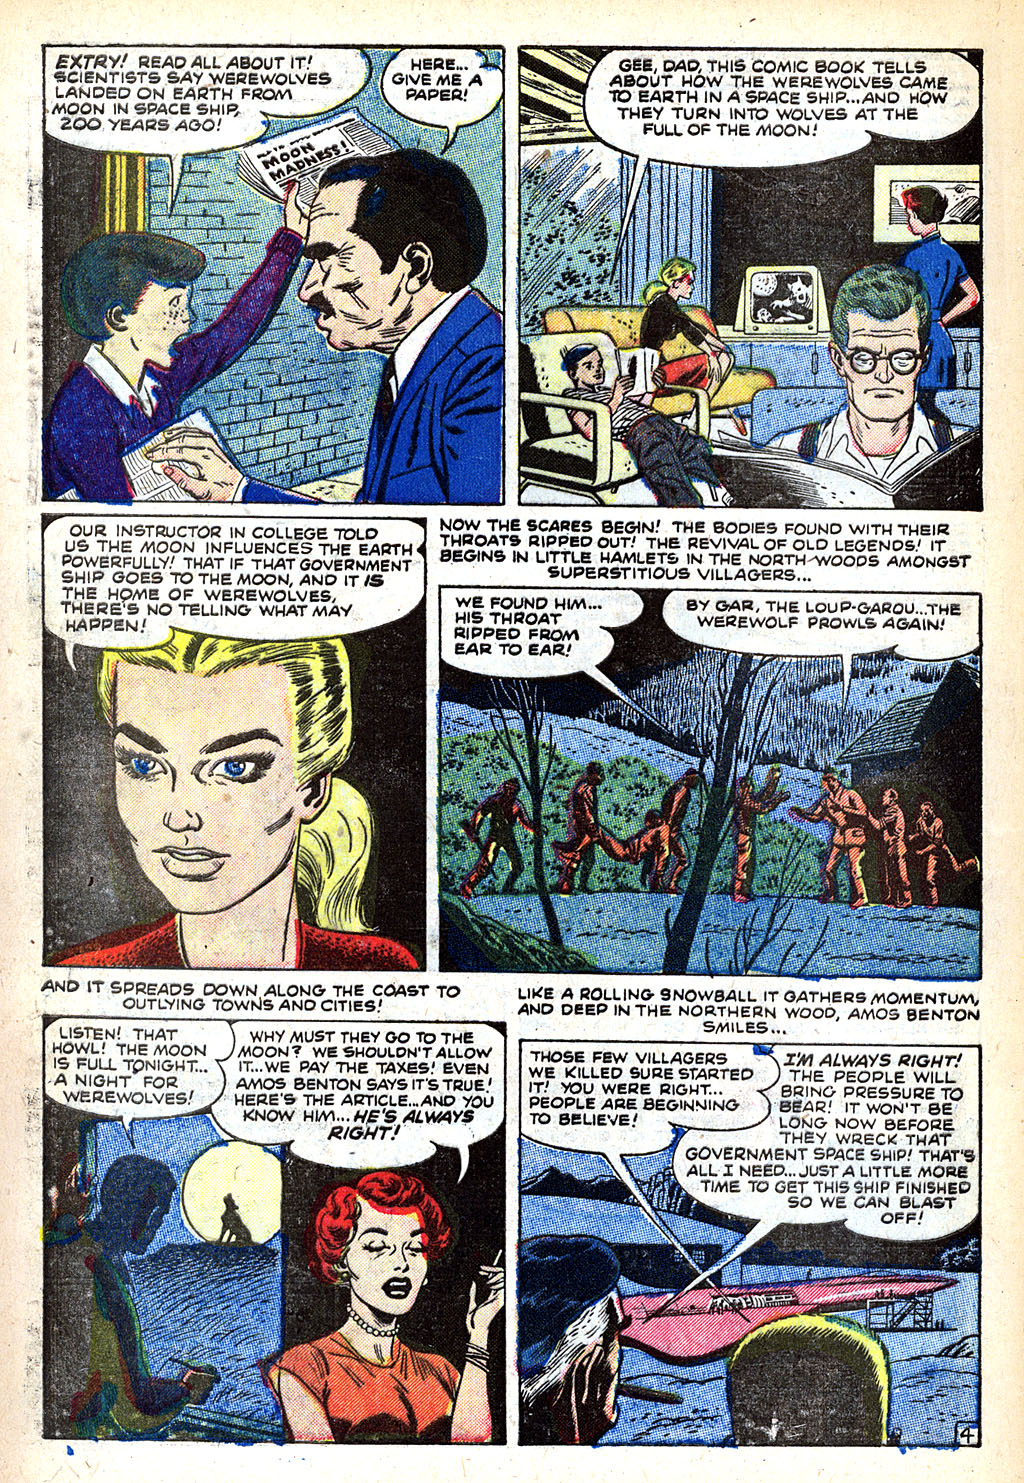 Marvel Tales (1949) 118 Page 5